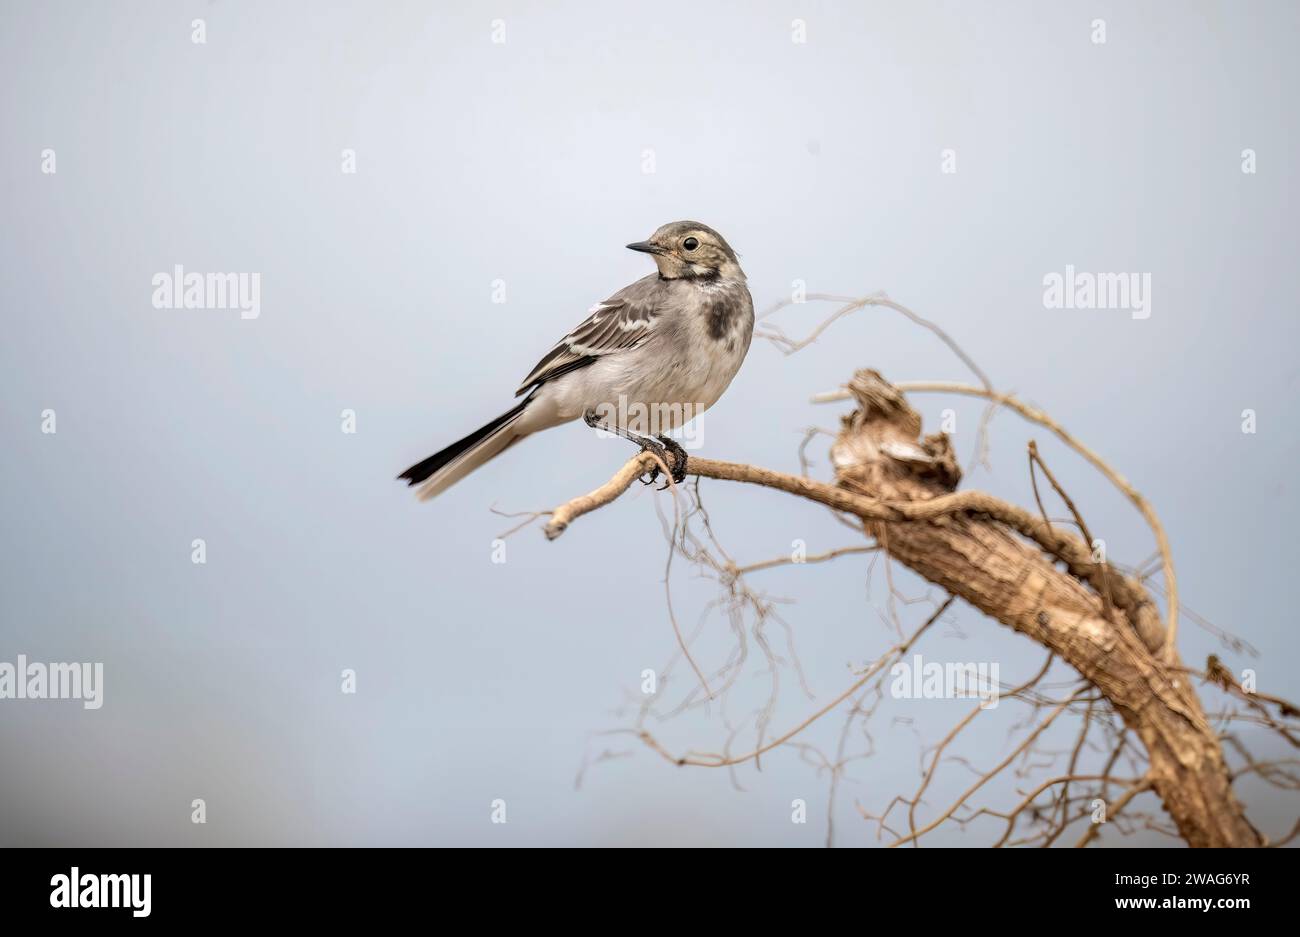 Pied Wagtail, juvenile, perched on a branch in summer Stock Photo